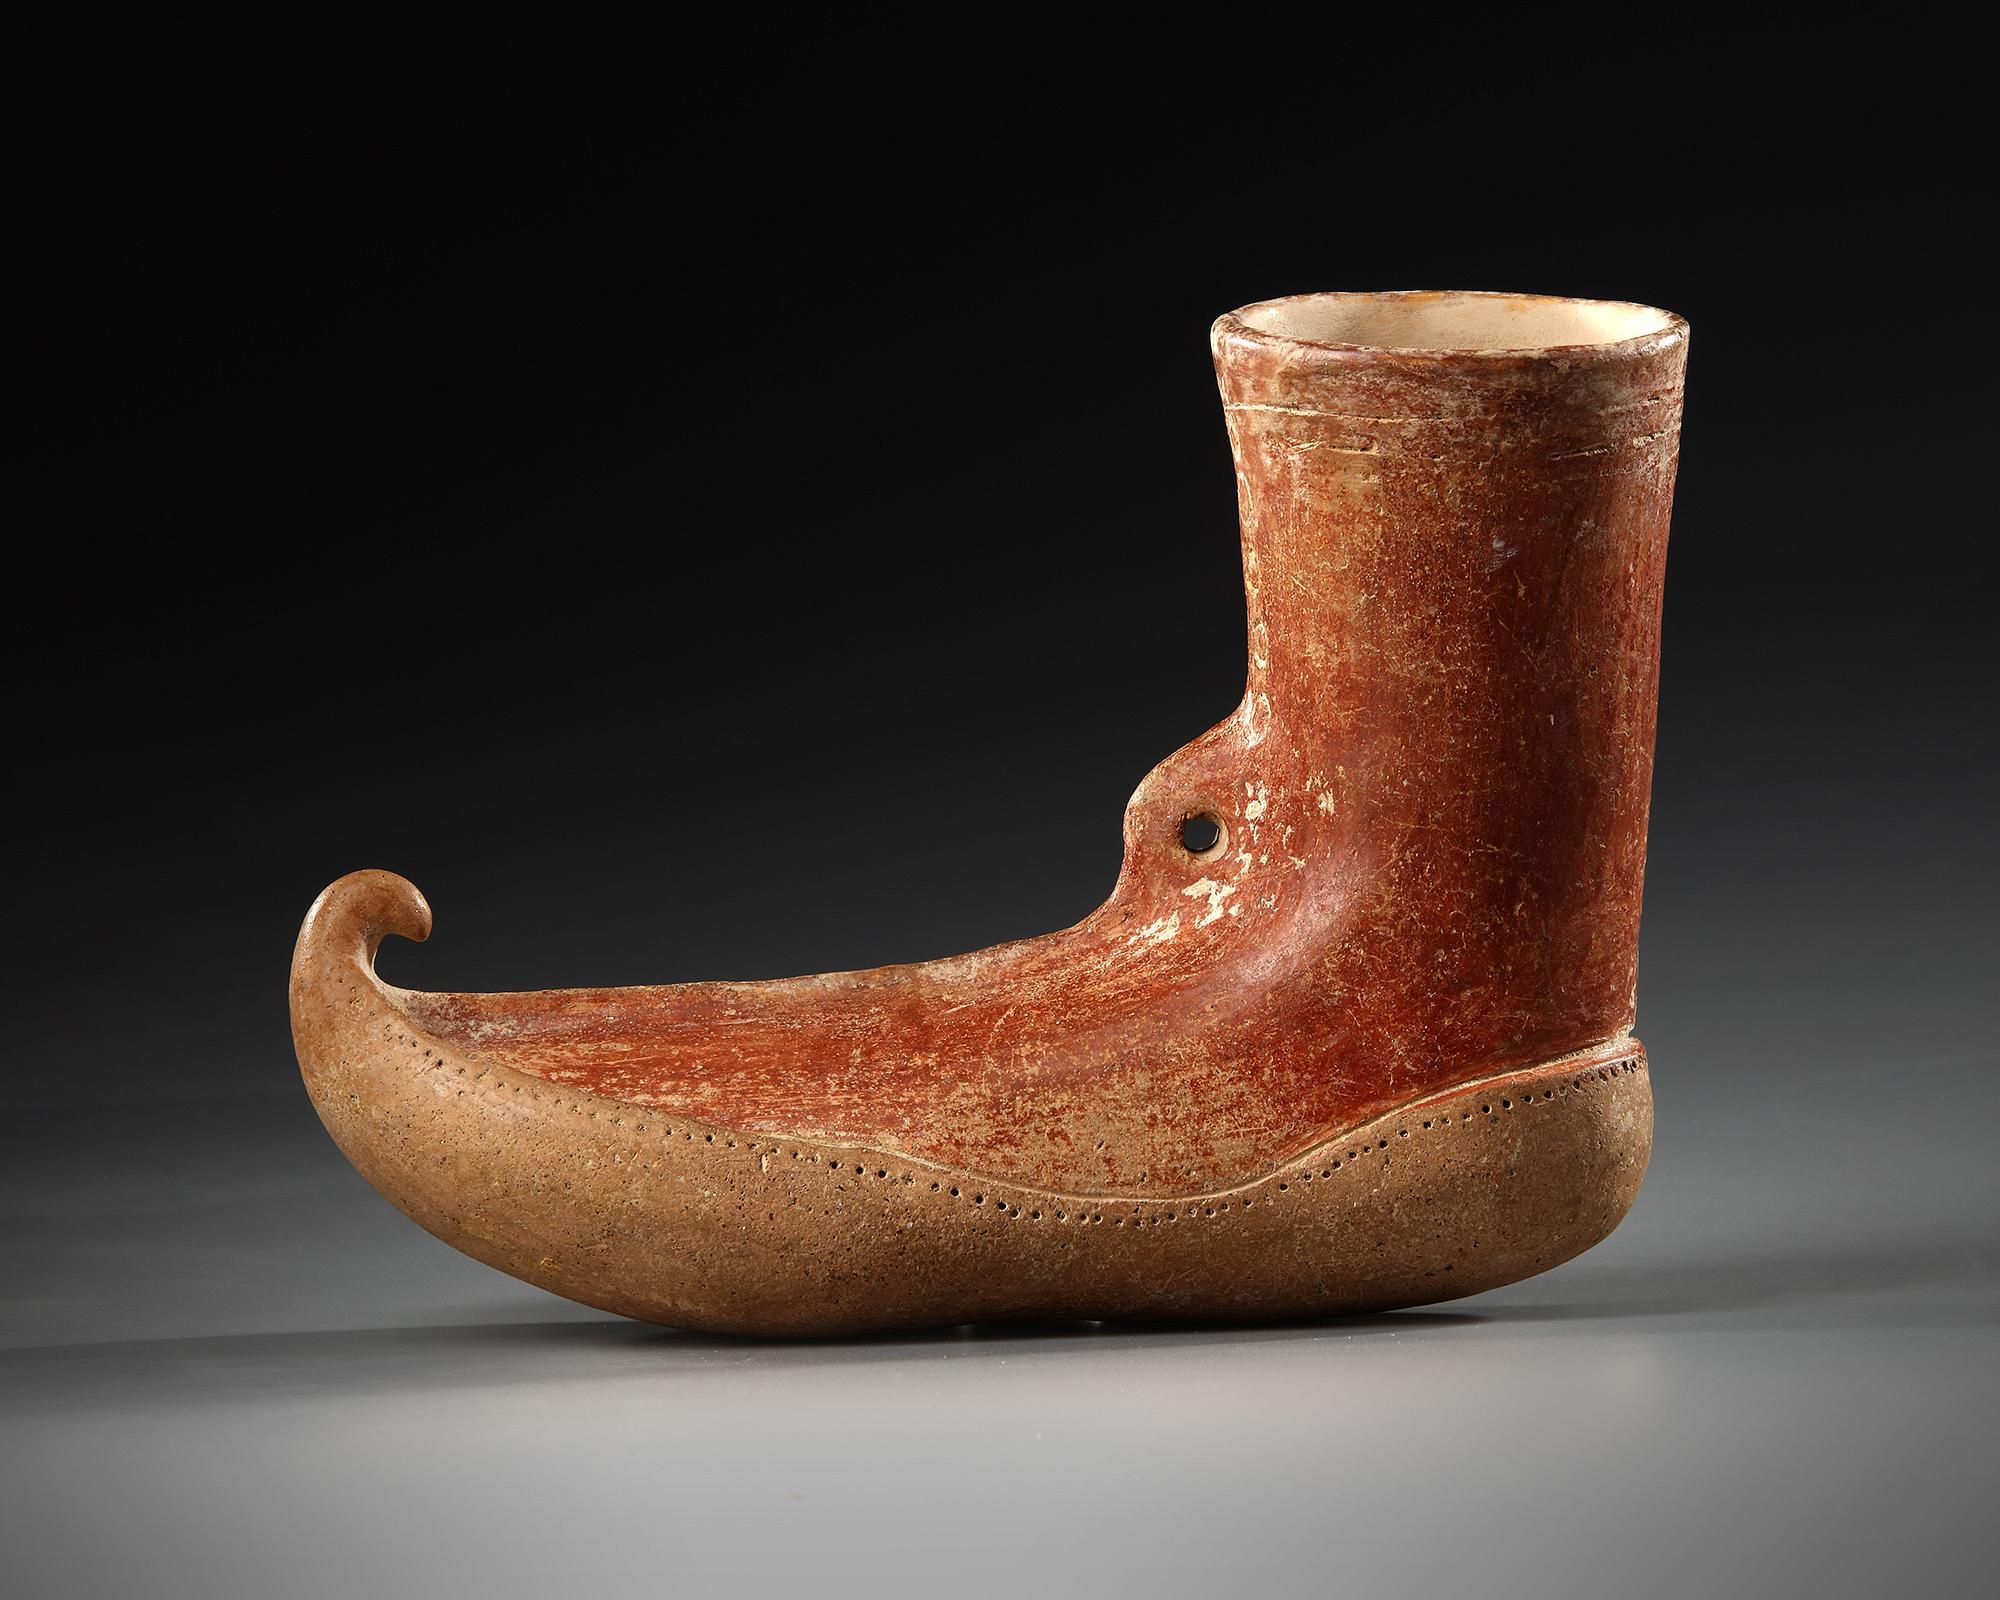 AN AMLASH RHYTON POTTERY IN FORM OF SHOES, CIRCA 1ST MILLENNIUM B.C. - Image 5 of 5